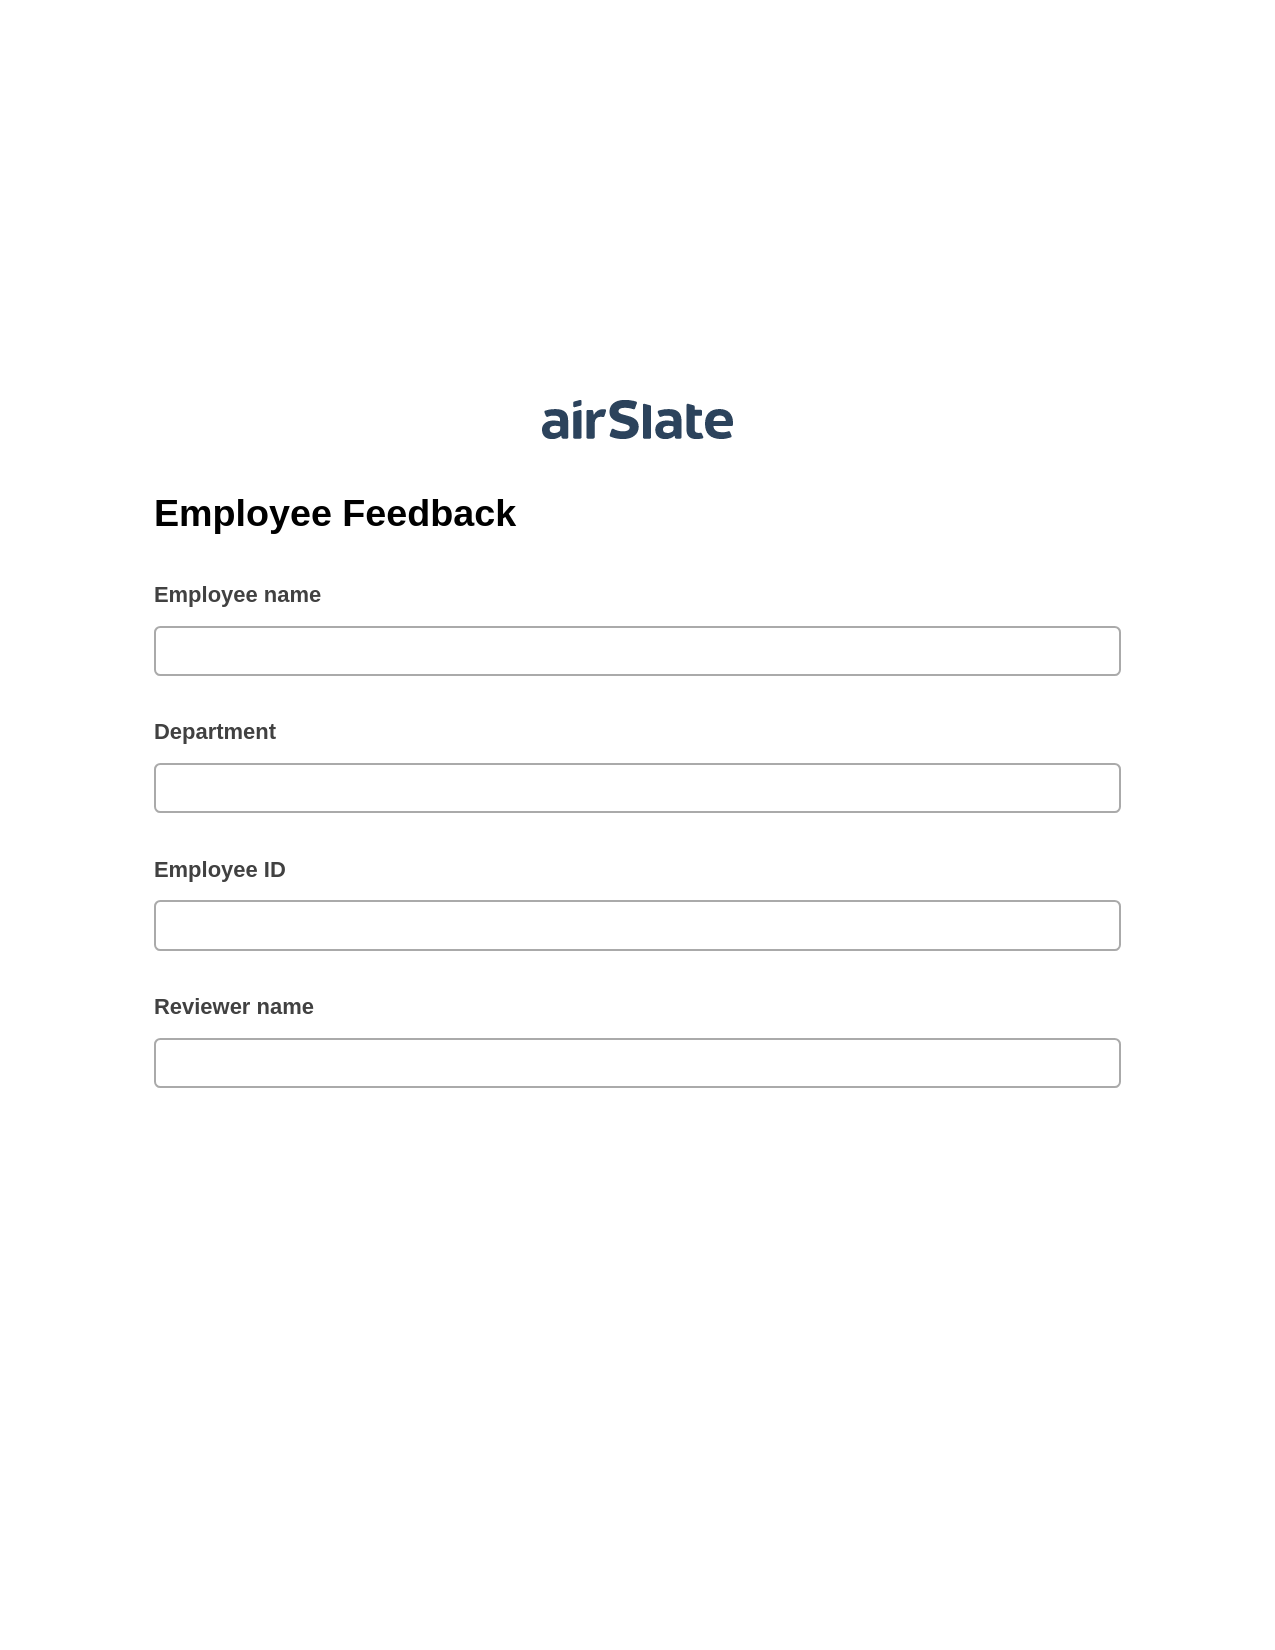 Employee Feedback Pre-fill from Google Sheet Dropdown Options Bot, System Bot - Create a Slate in another Flow, Webhook Postfinish Bot